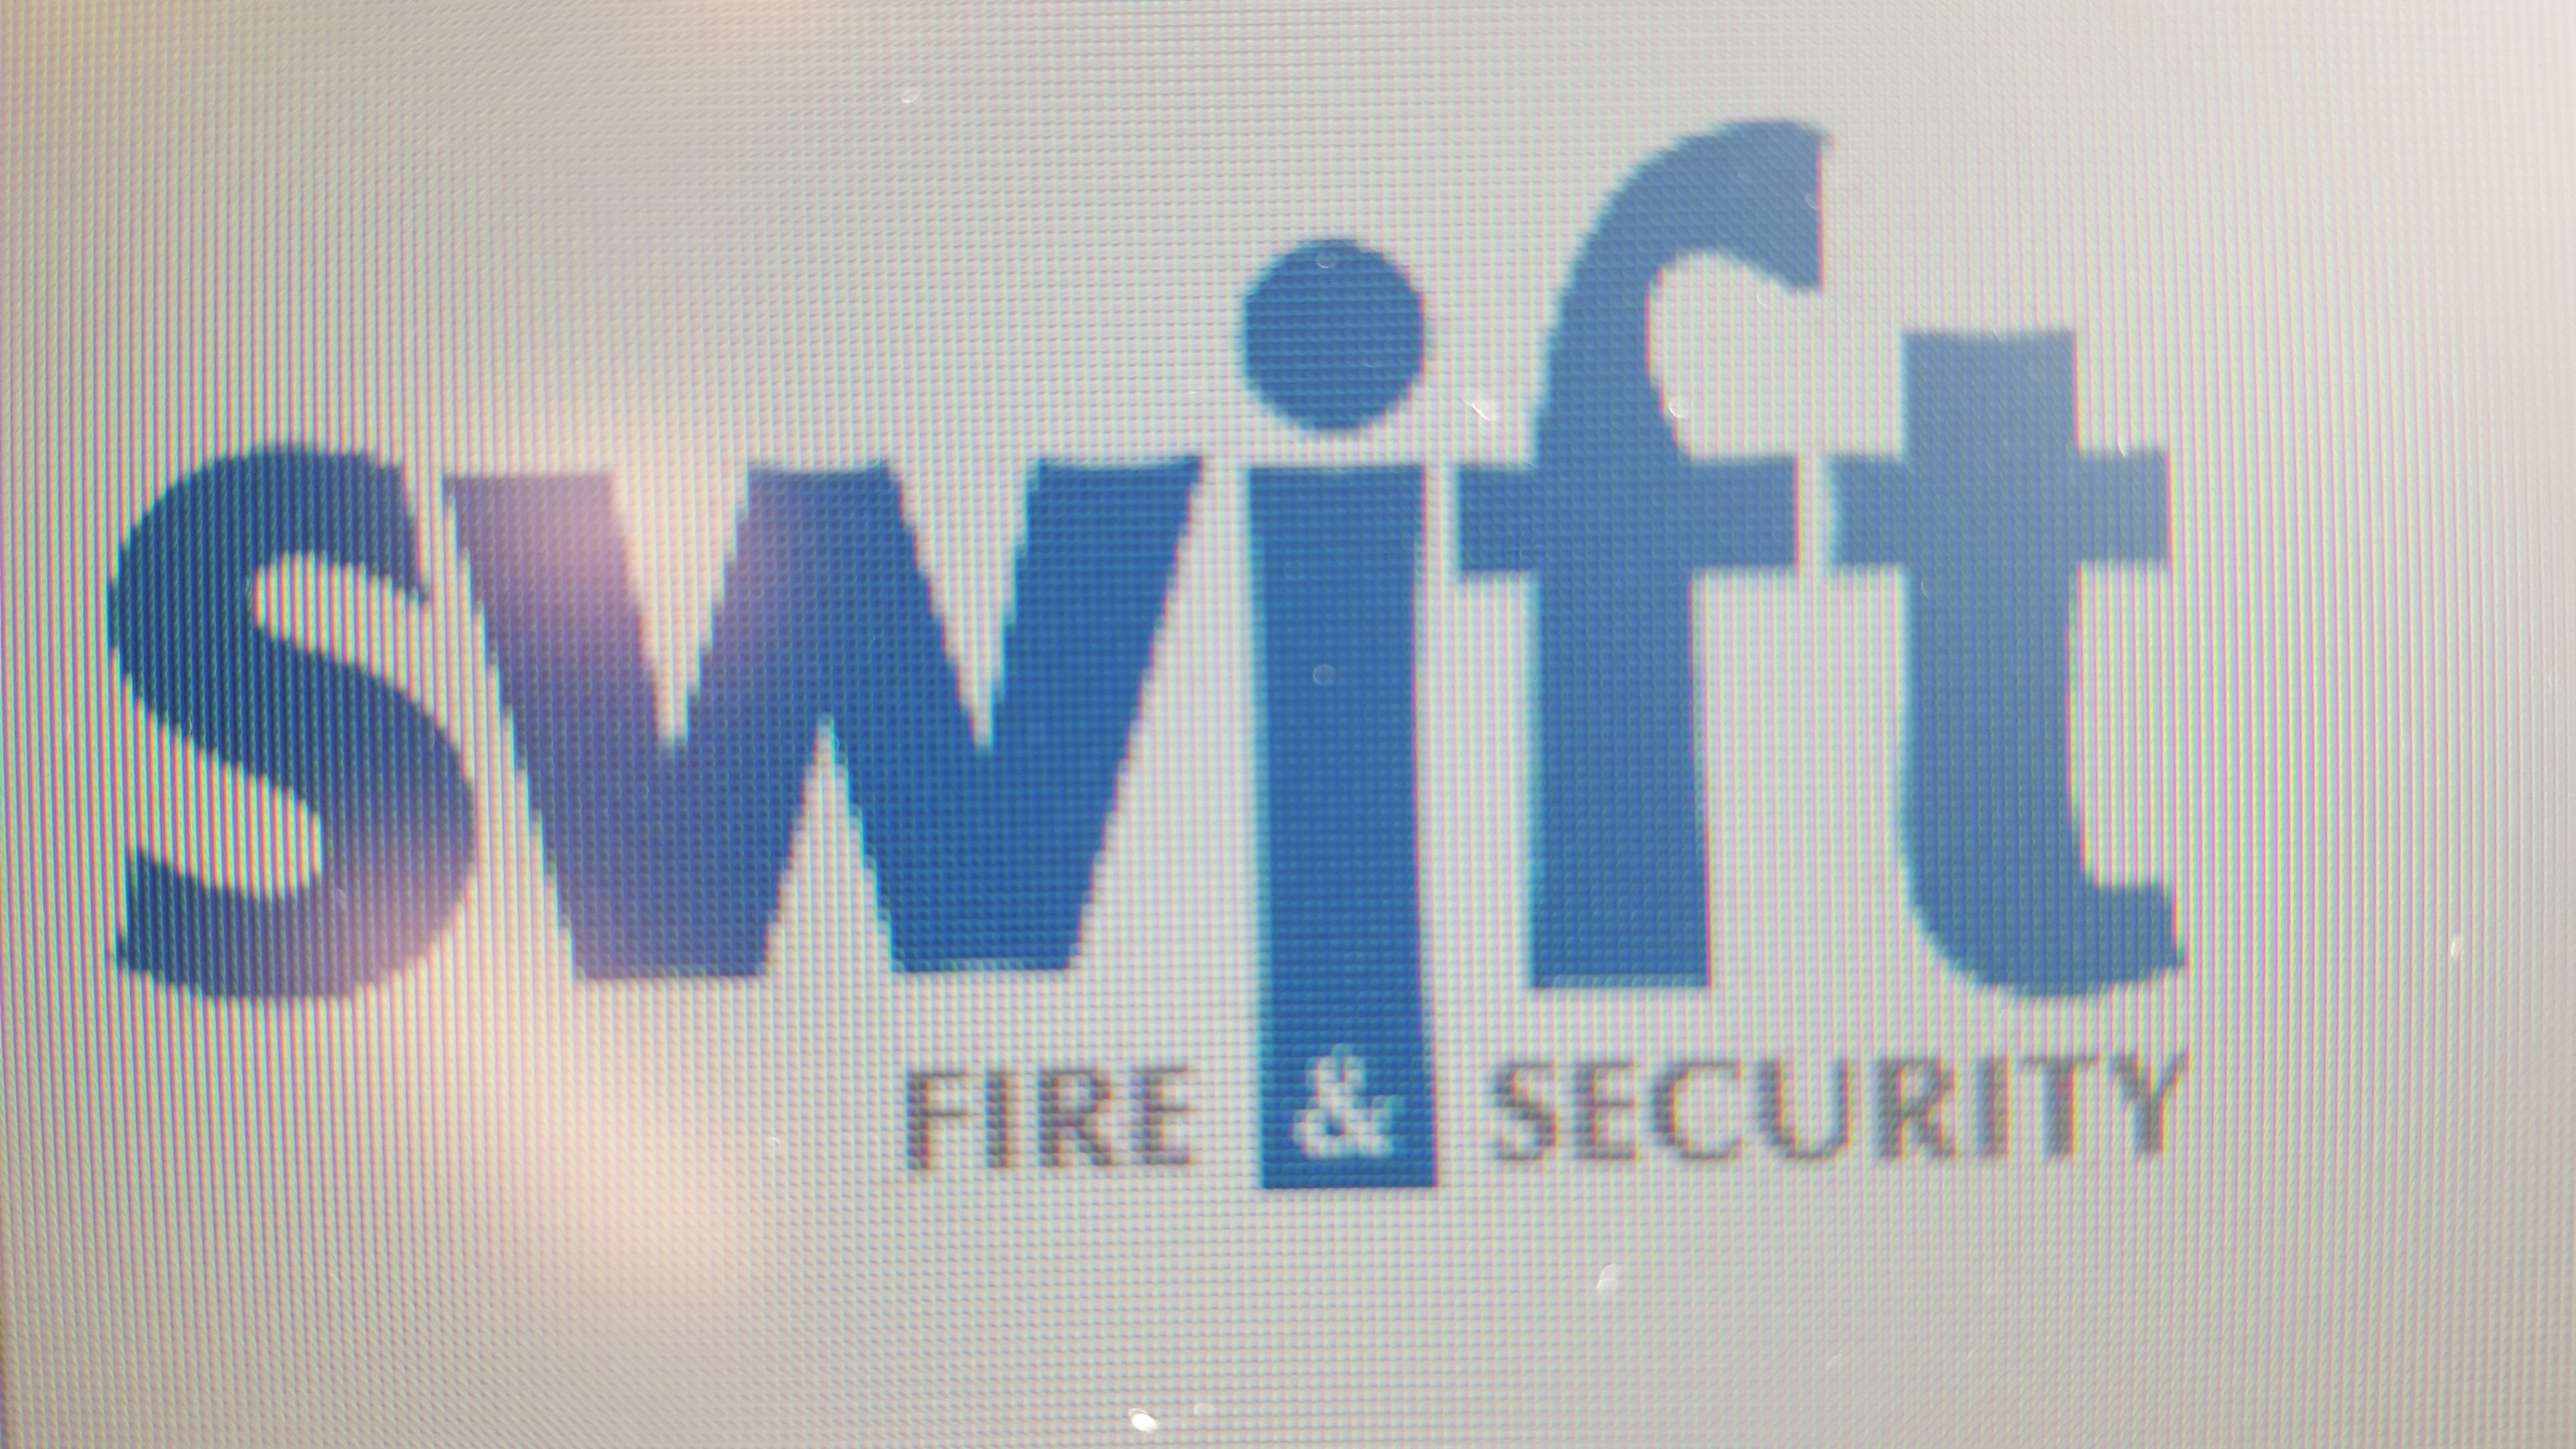 Swift Fire and Security - Basic Audit